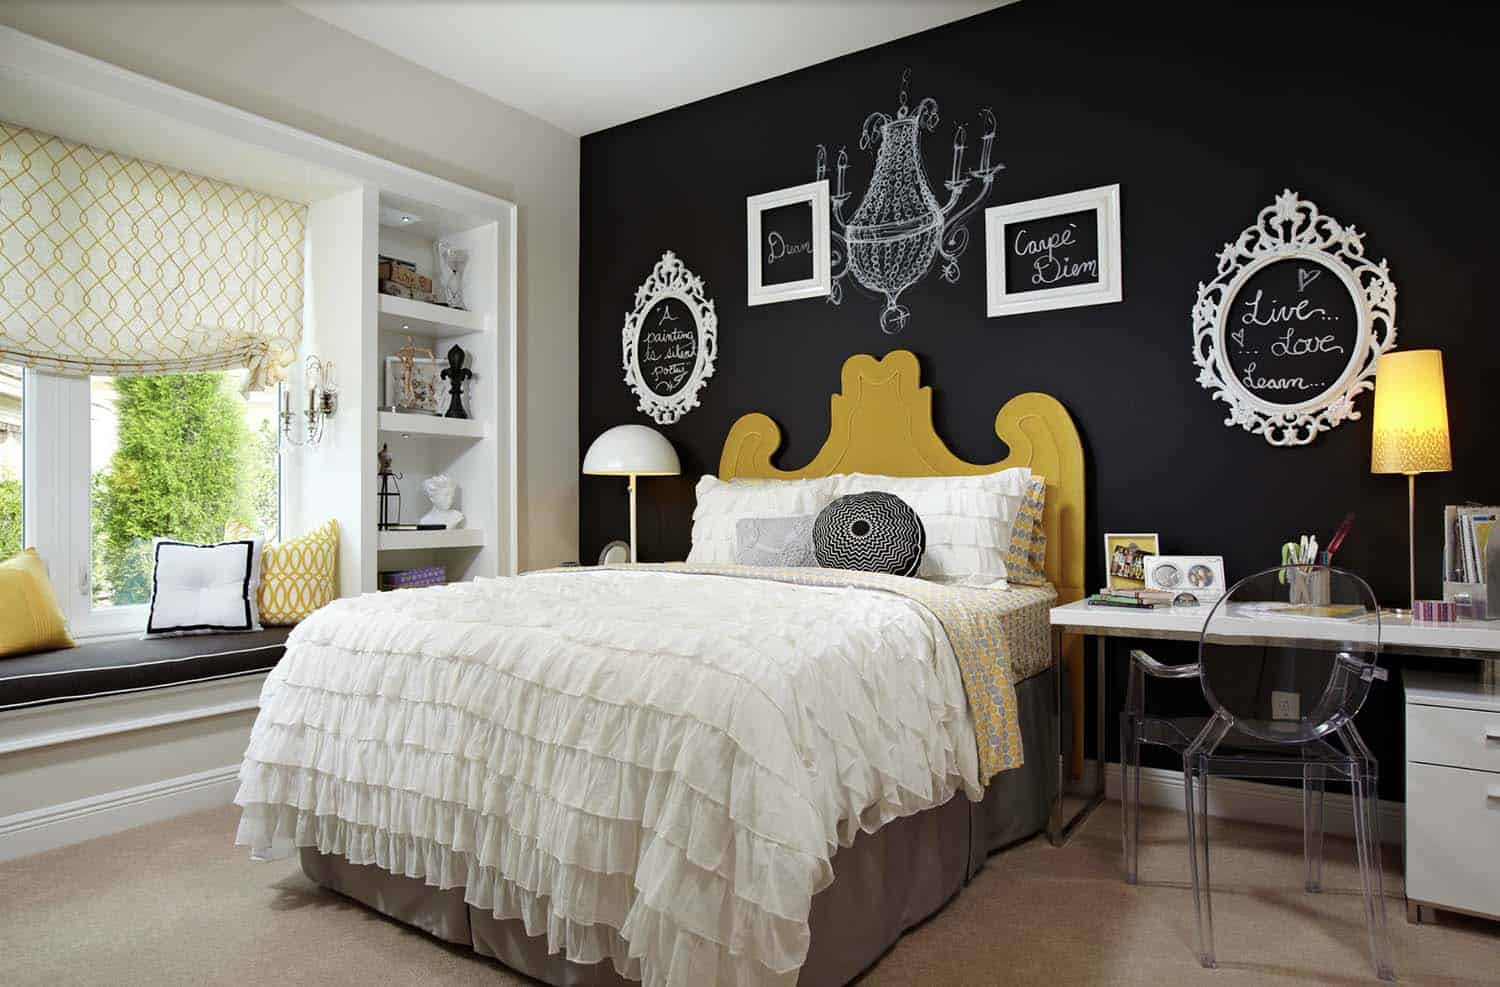 eclectic bedroom with a black chalk board accent wall and built-in window seat